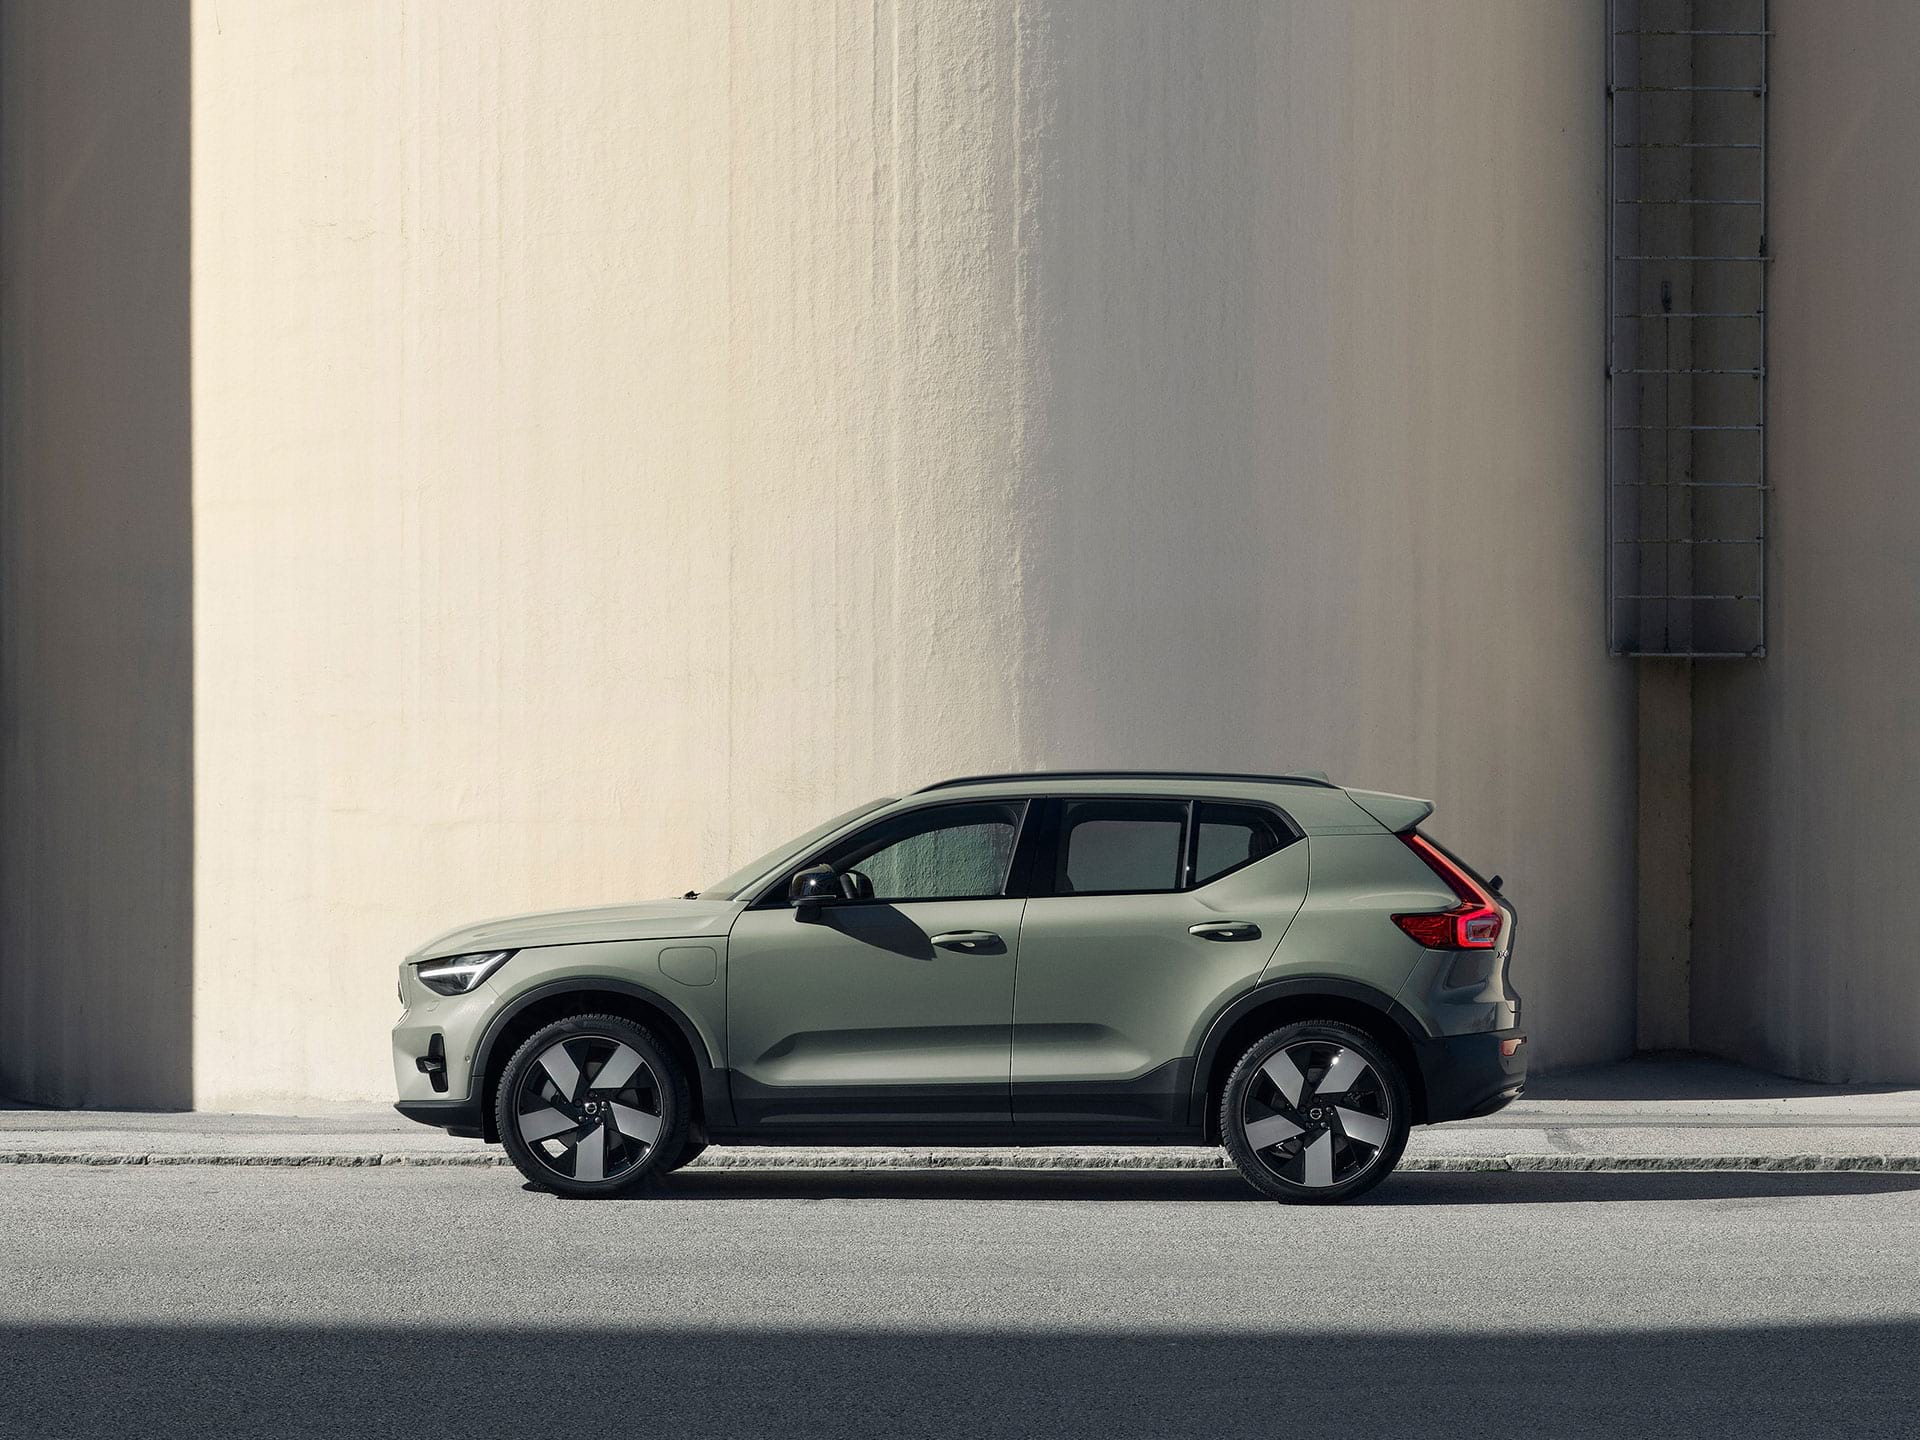 A green Volvo XC40 Recharge electric SUV.